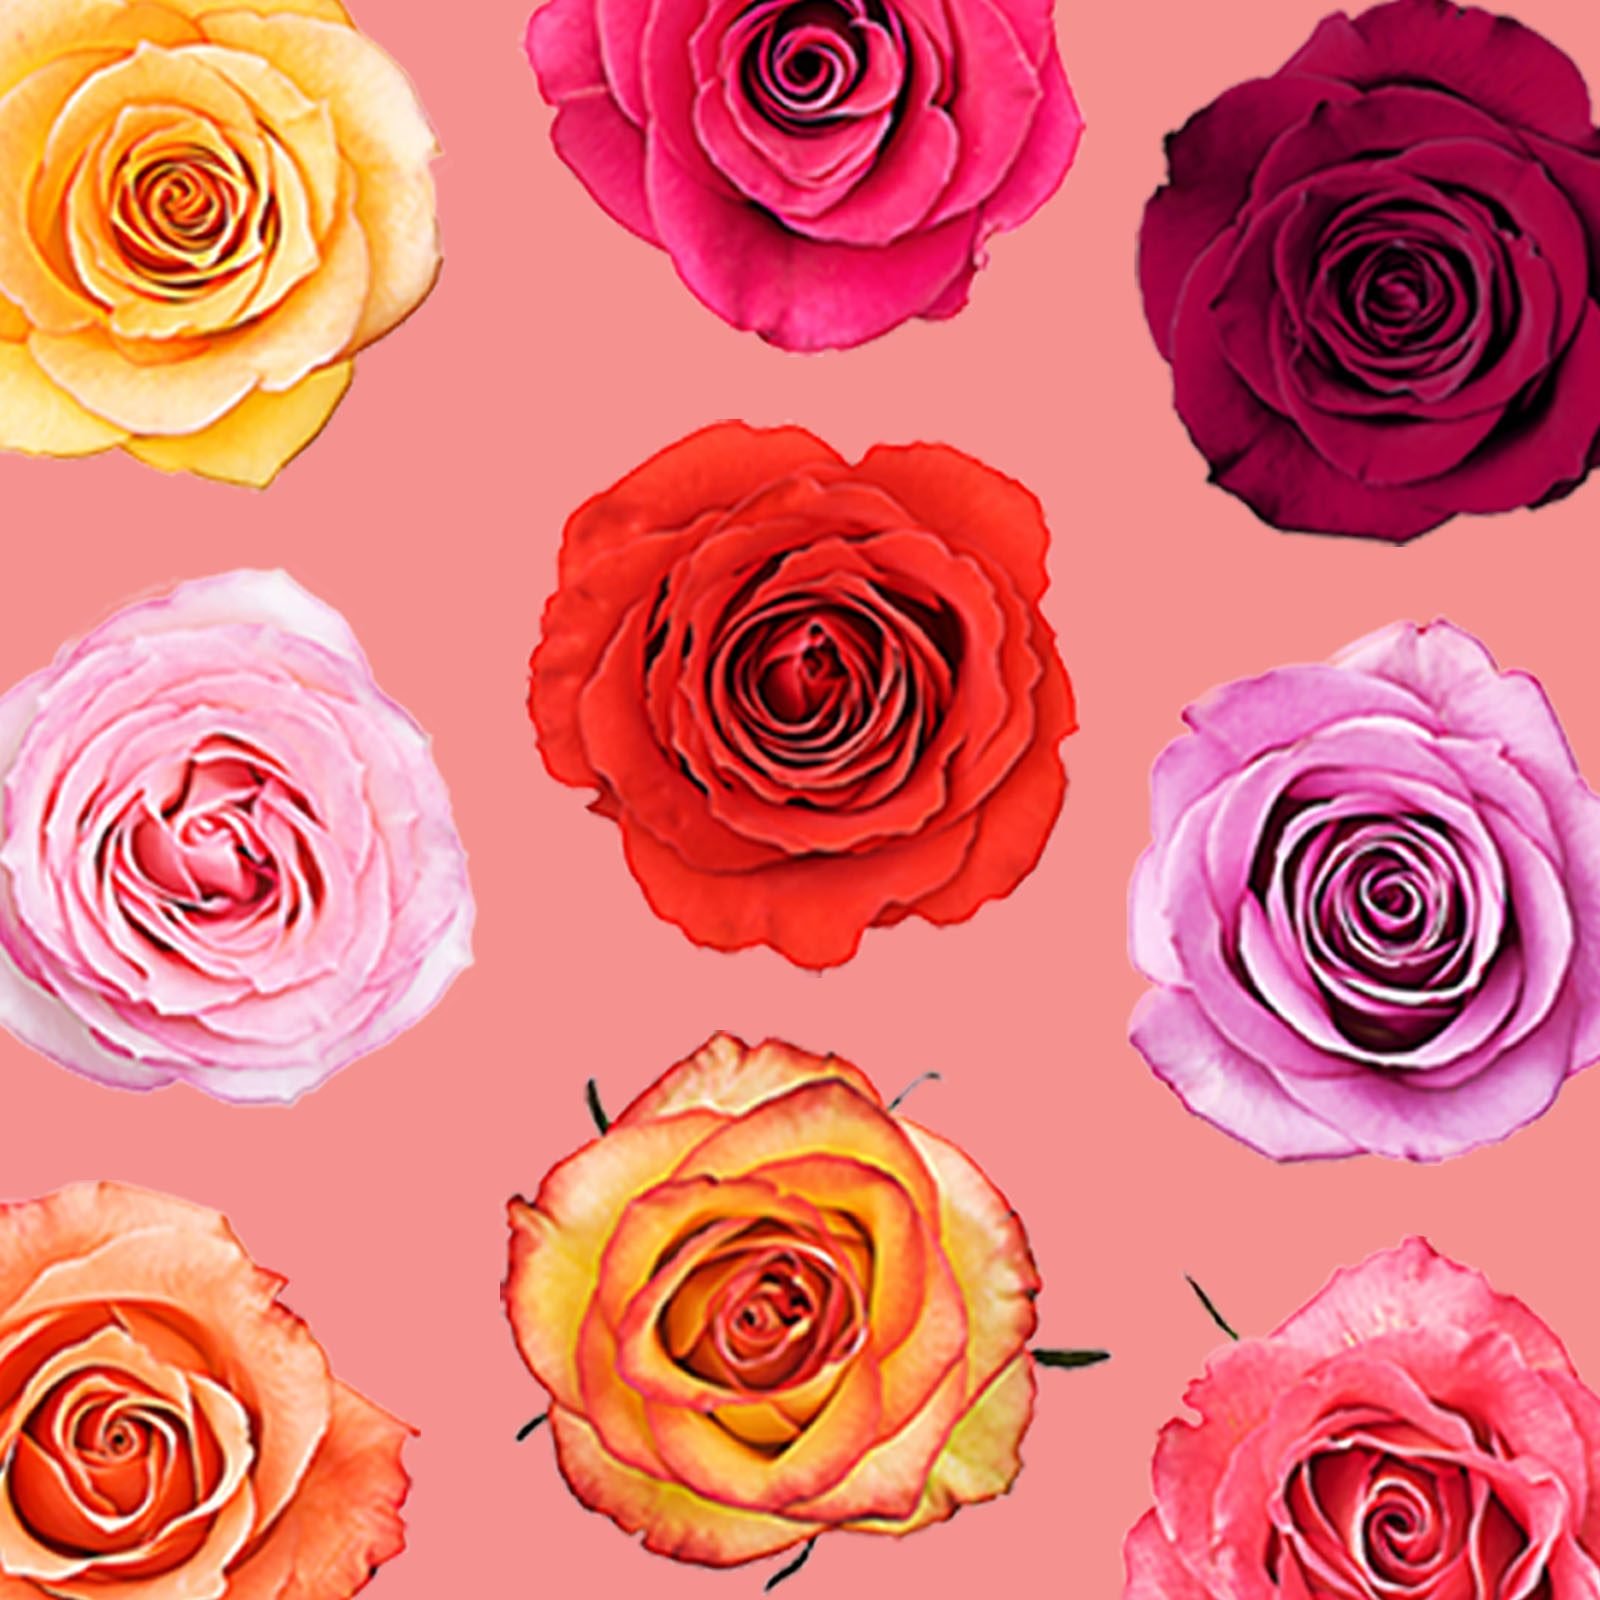 17 Rose Color Meanings To Help You Choose The Perfect Bouquet